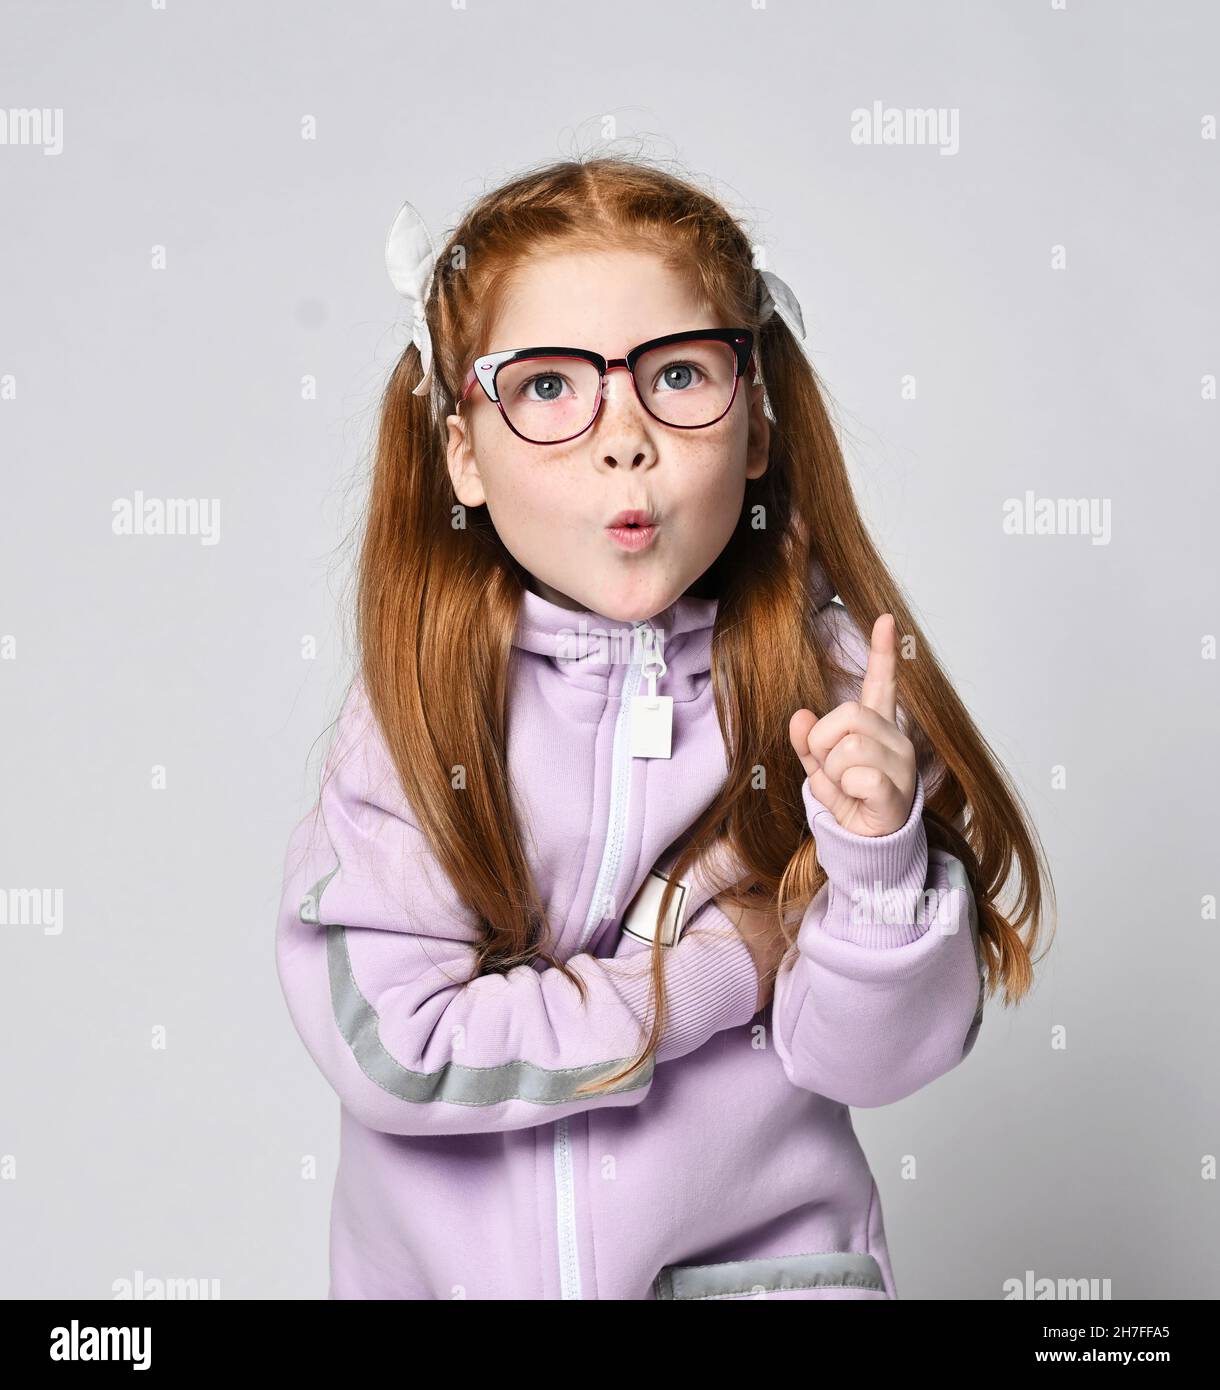 Portrait of smart redhead kid girl in glasses and pink jumpsuit with hood standing holding finger up, got an idea Stock Photo